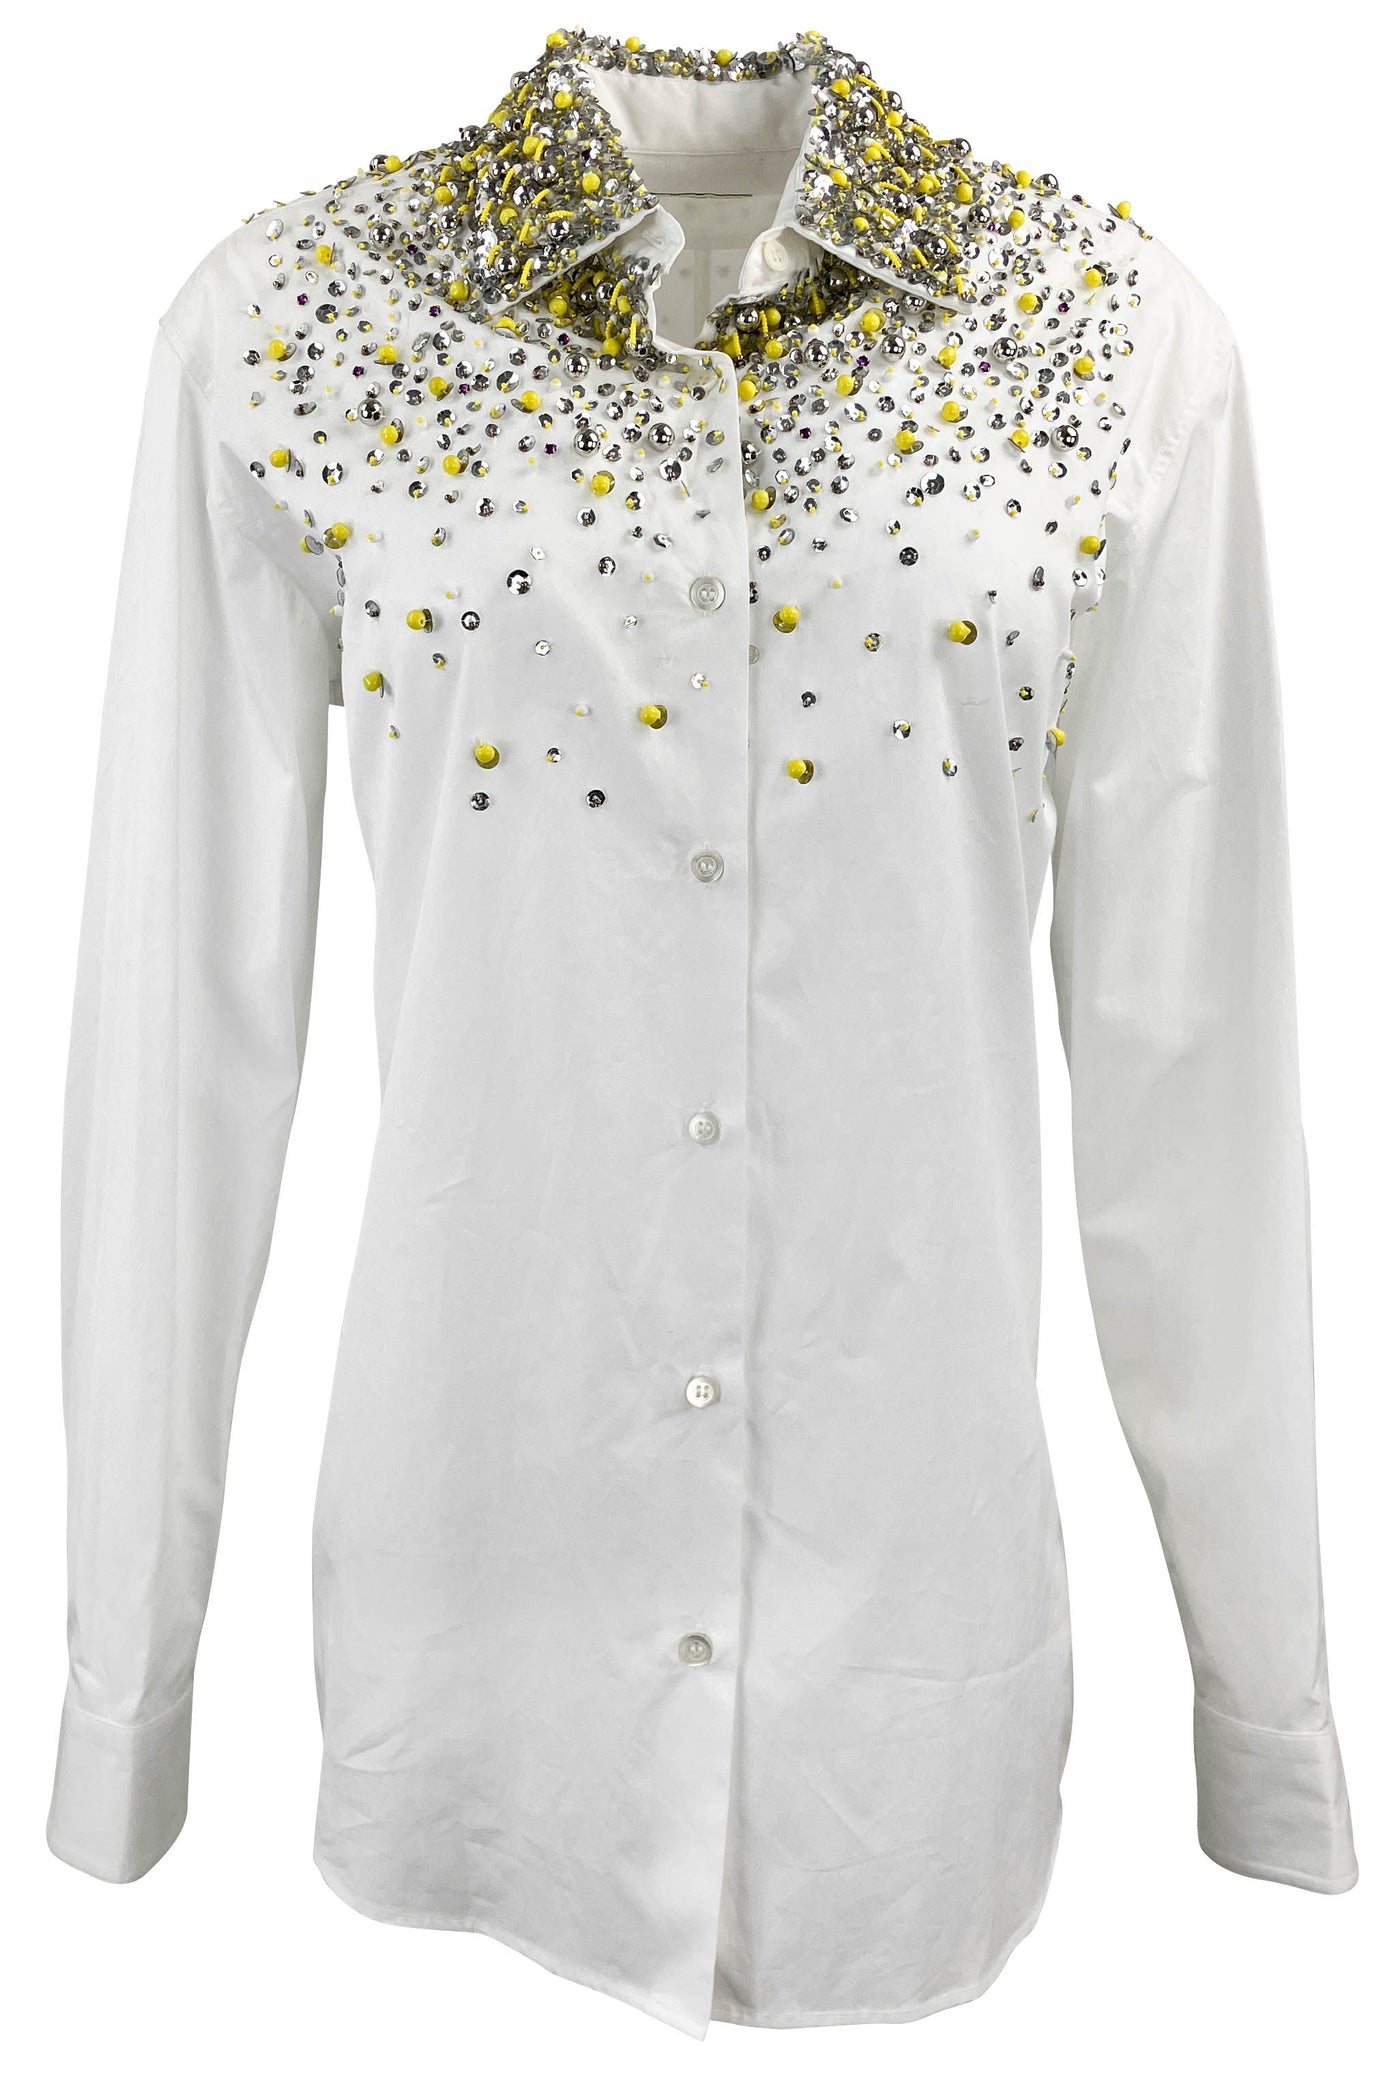 Dries Van Noten Clavelly Embellished Shirt in White - Discounts on Dries Van Noten at UAL